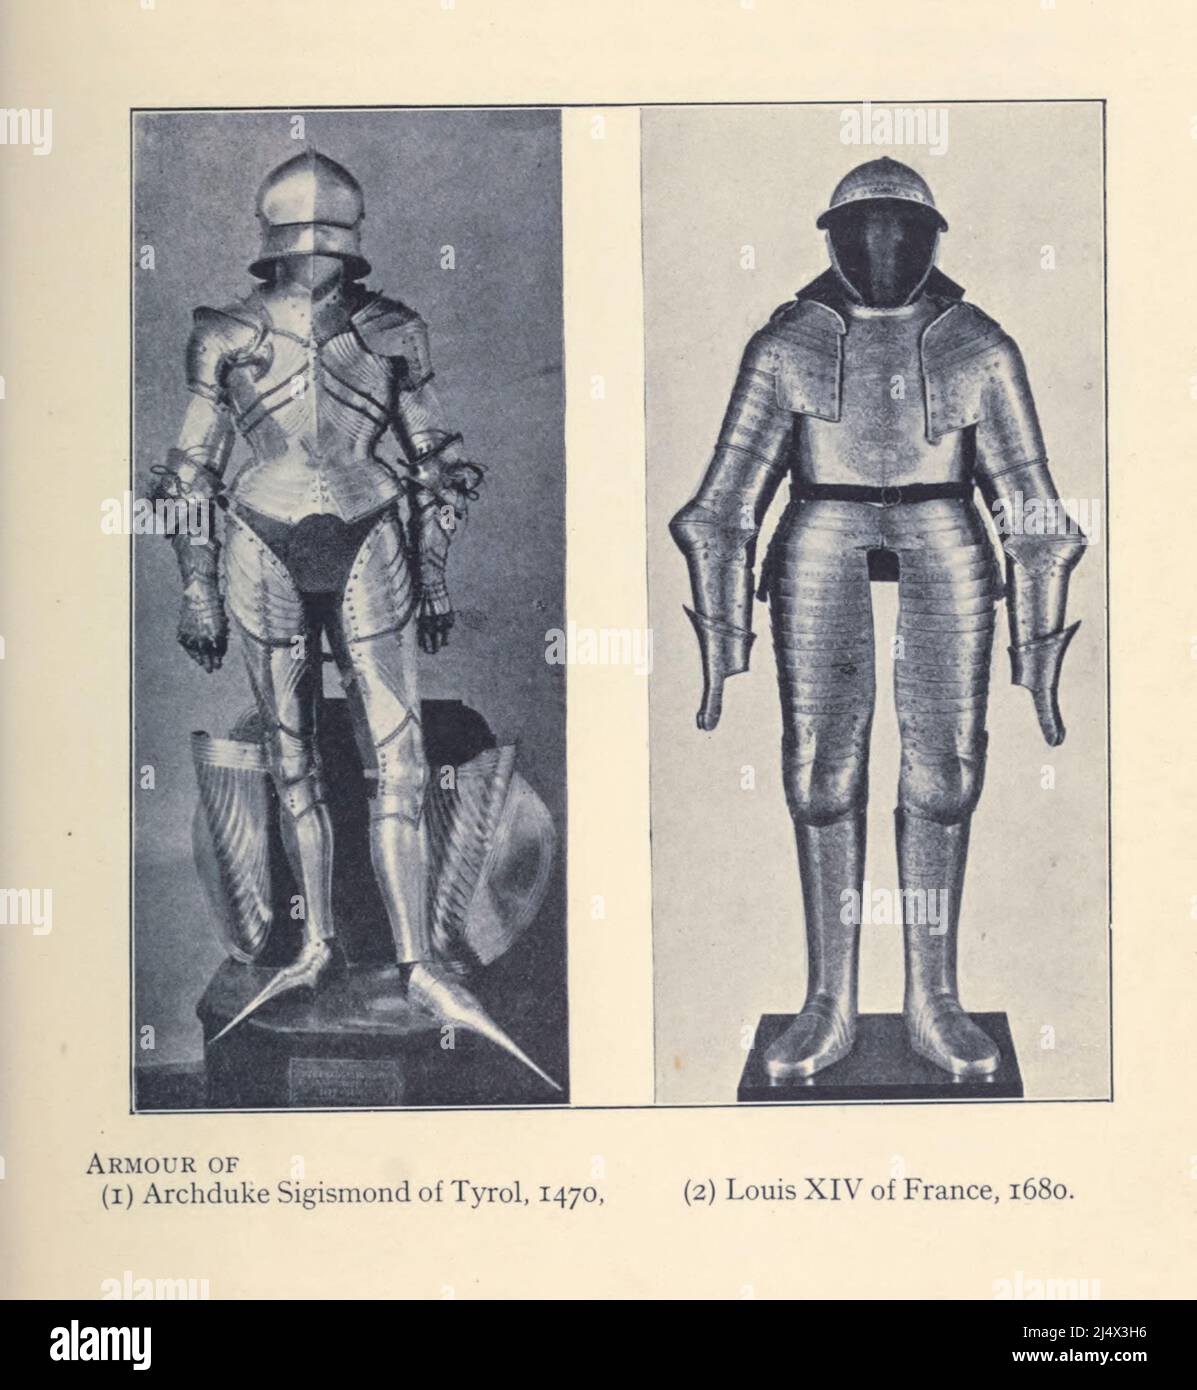 Armour of Archduke Sigismond of Tyrol, 1470 (Left) and Armour of Louis XIV of France, 1680 (Right) from the book ' Armour & weapons ' by Charles John Ffoulkes,  Publisher Oxford Clarendon press 1909 Stock Photo